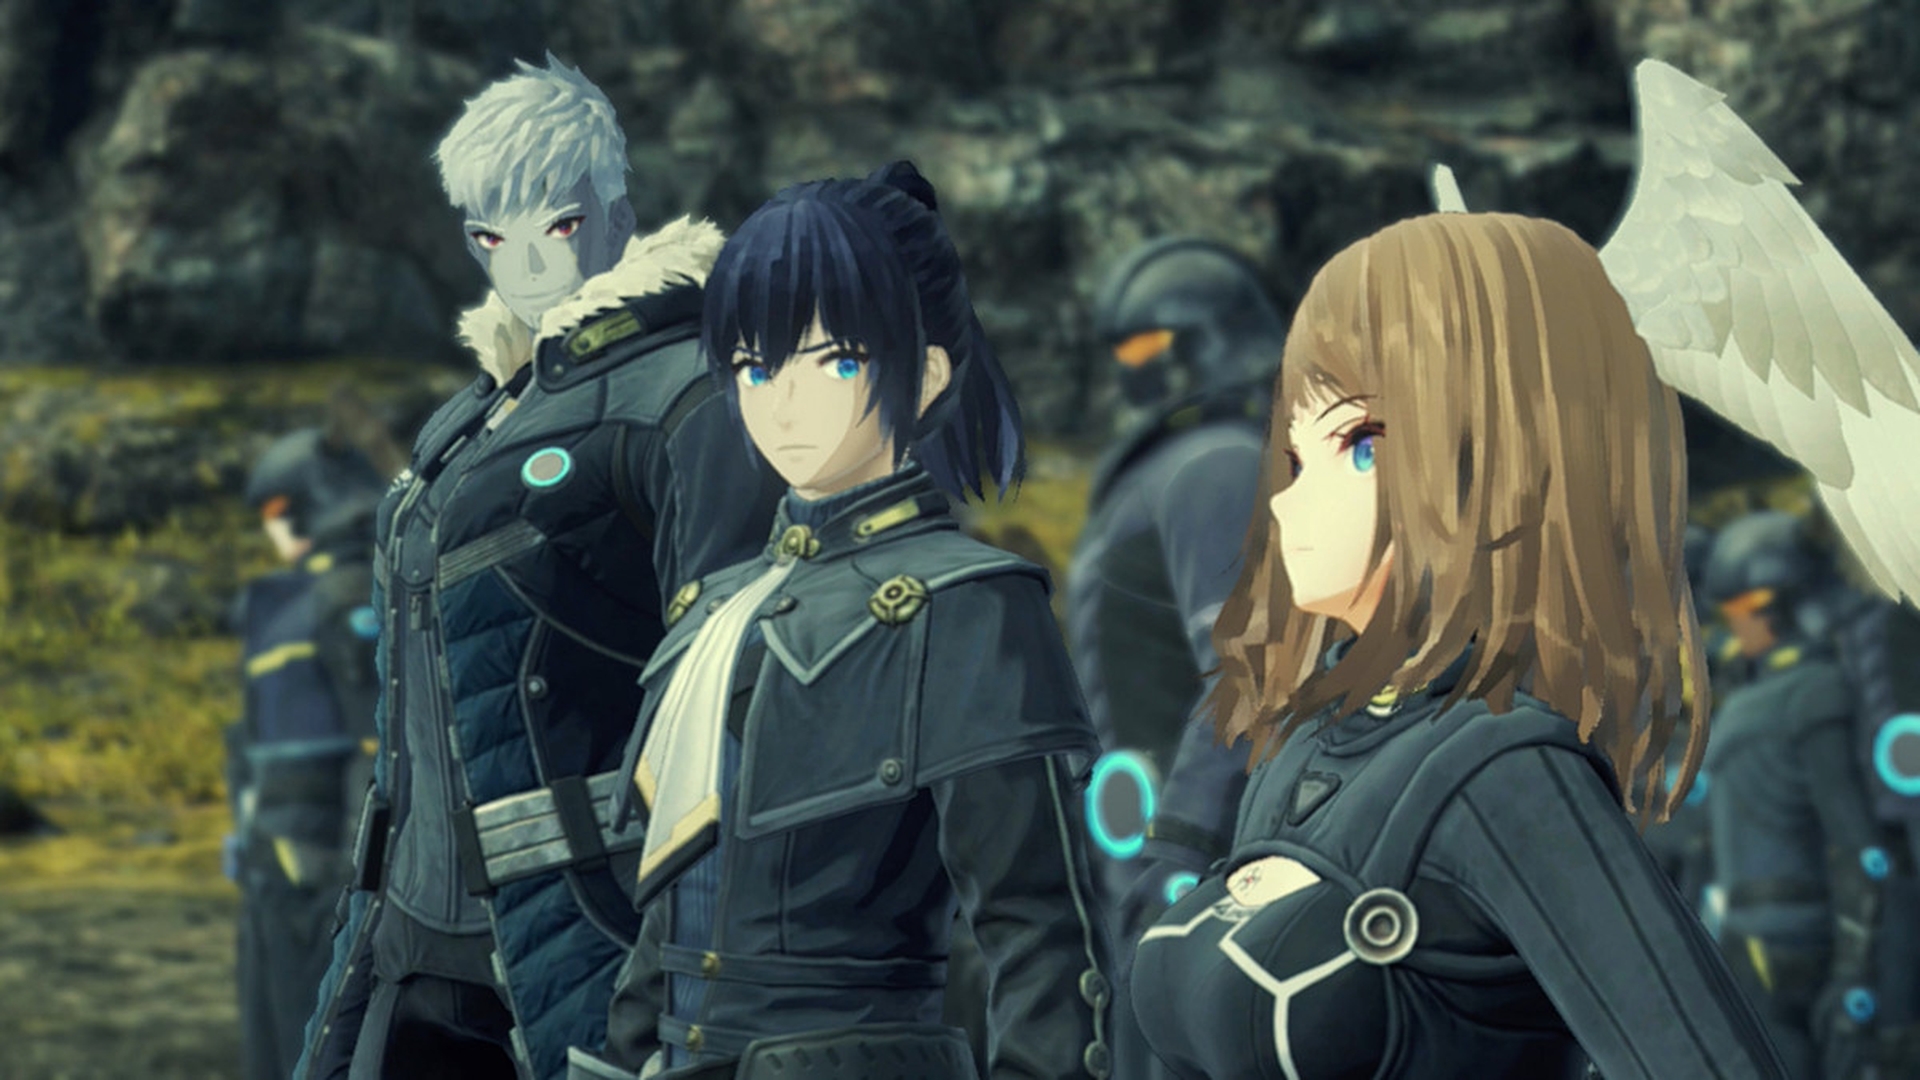 Critically aclaimed RPG Xenoblade Chronicles 3 is extremely fun, but you might want to level up fast, so here is our Xenoblade Chronicles 3 XP farming guide.